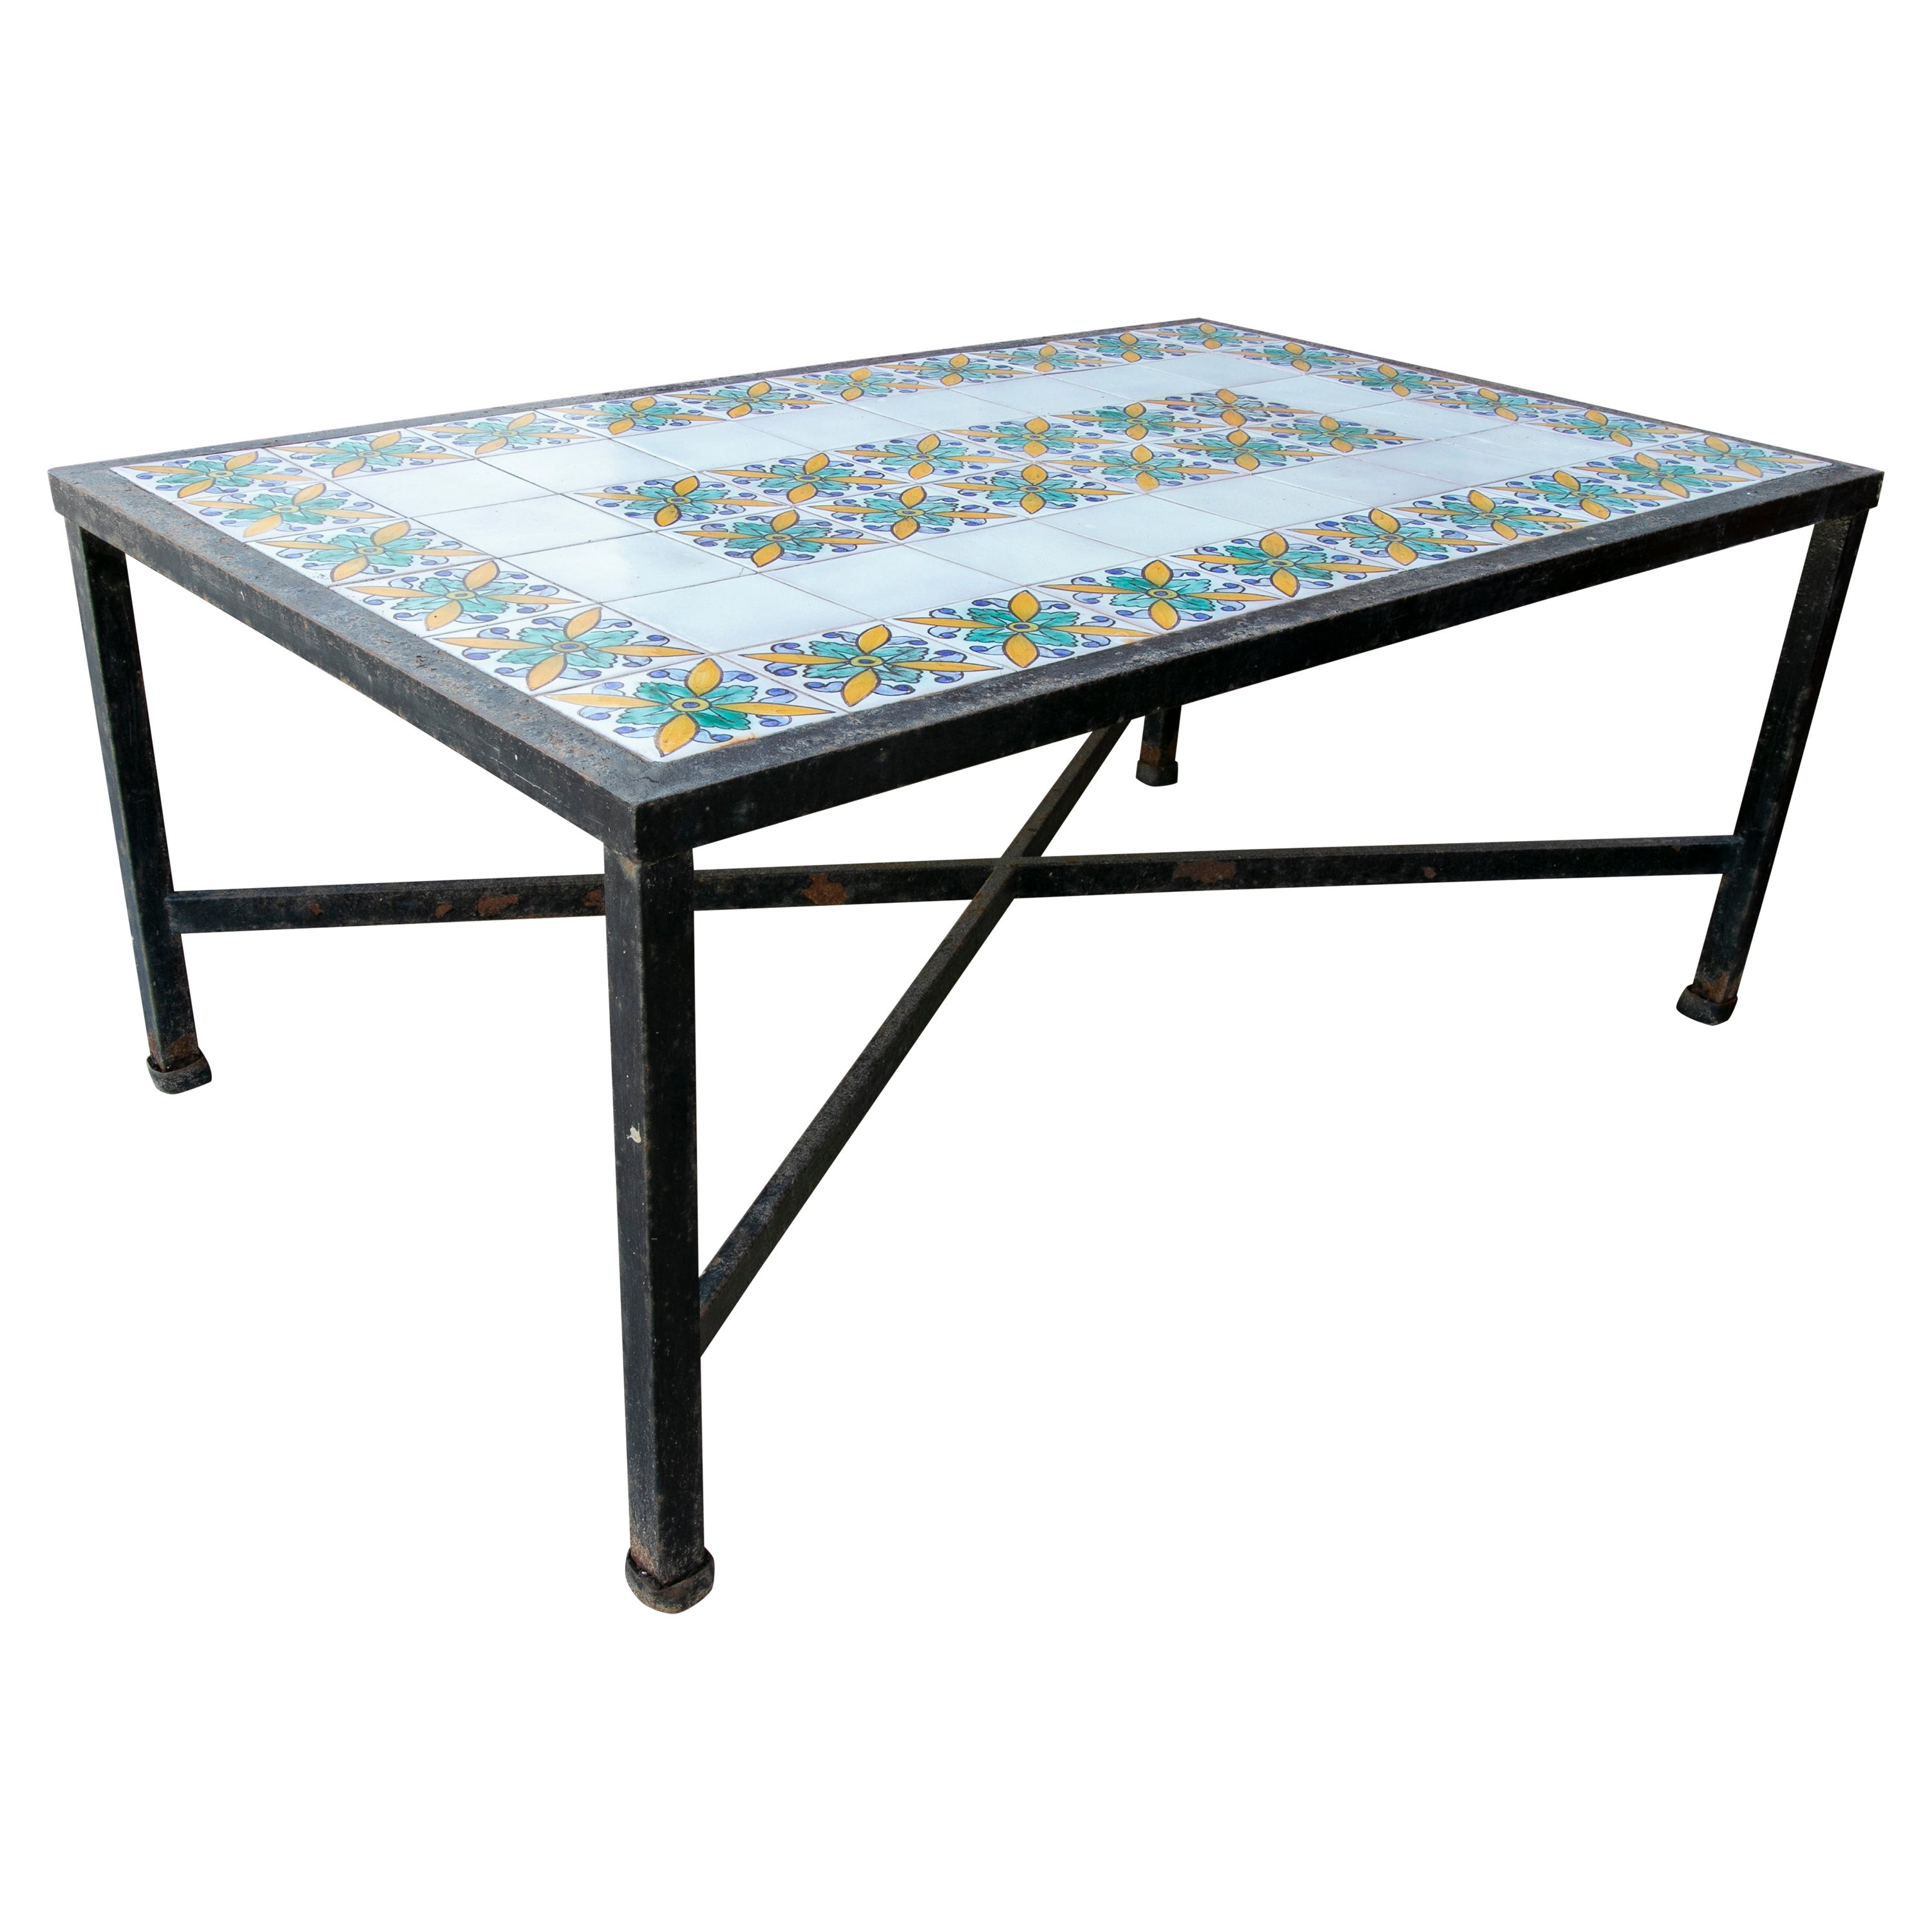 1980s Table with Iron Base and Geometrical Tiles on Top For Sale